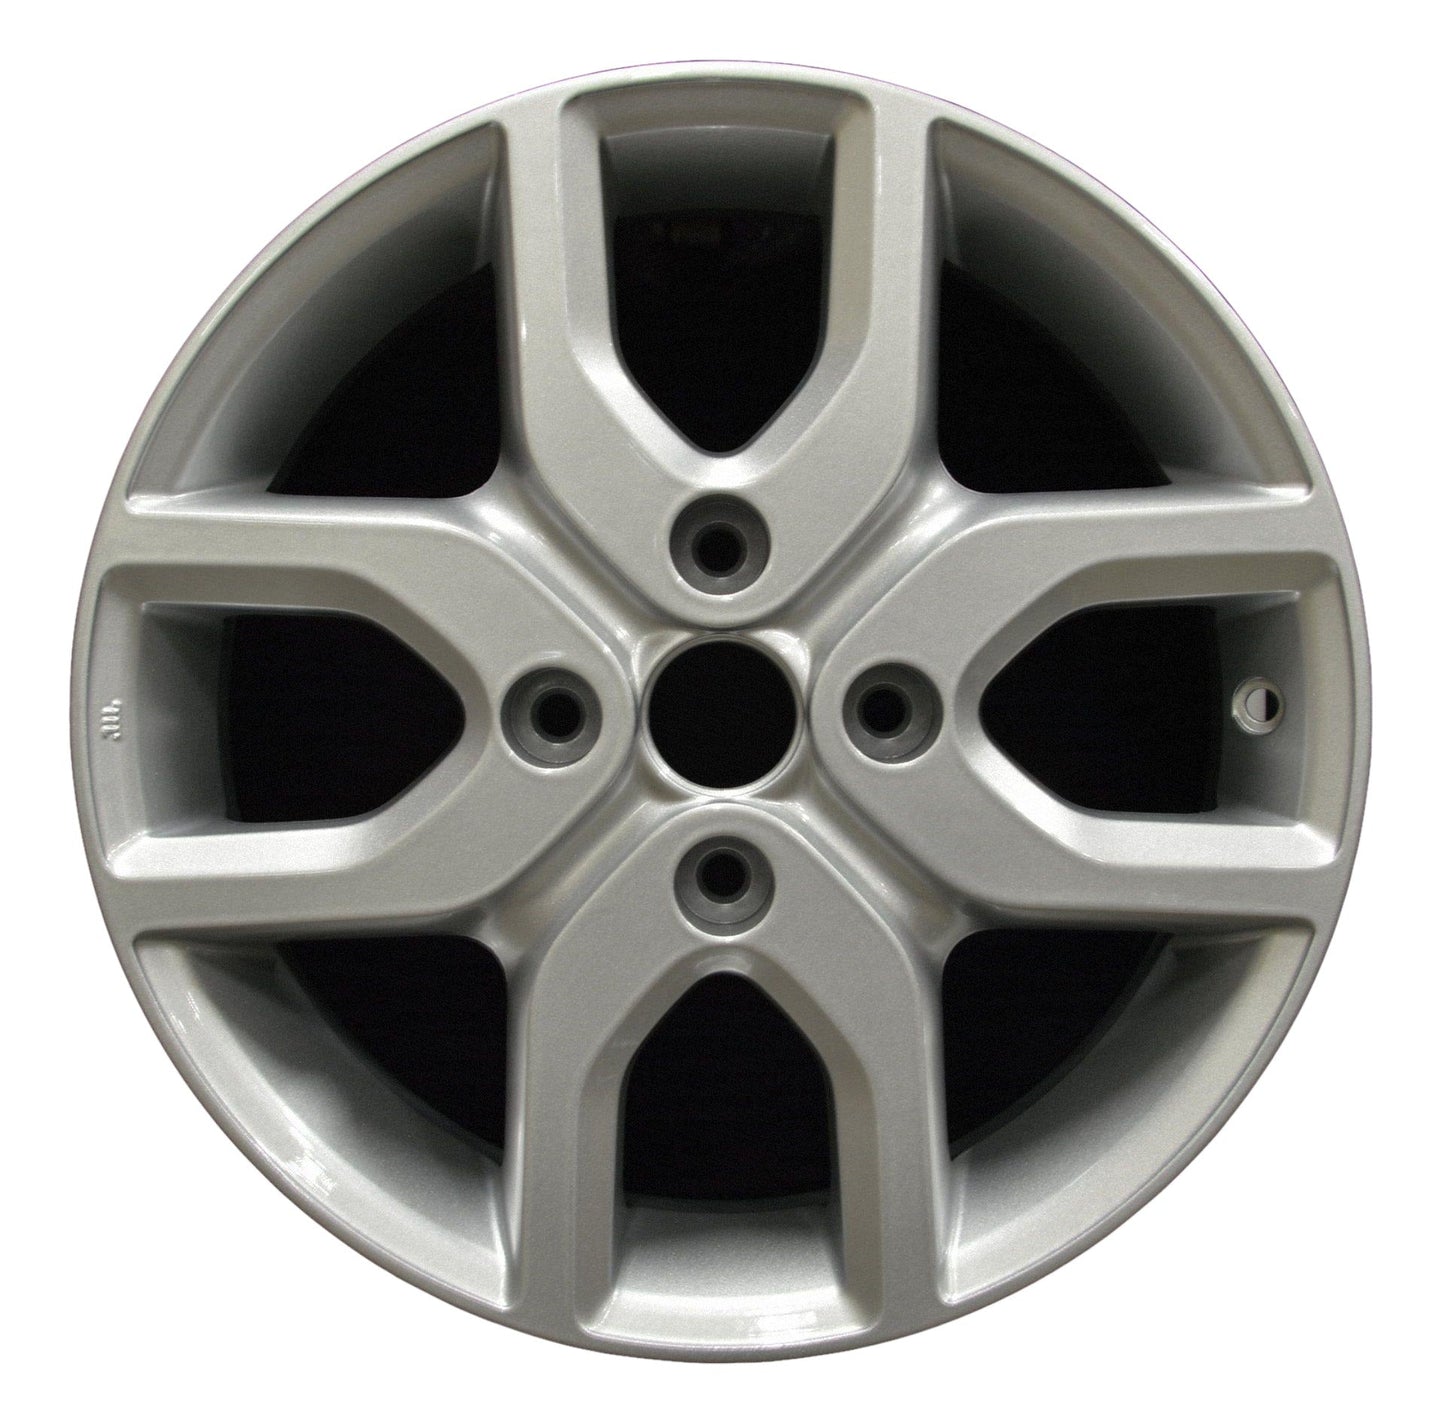 Nissan Cube  2009, 2010, 2011, 2012, 2013, 2014 Factory OEM Car Wheel Size 16x6 Alloy WAO.62536.PS13.FF